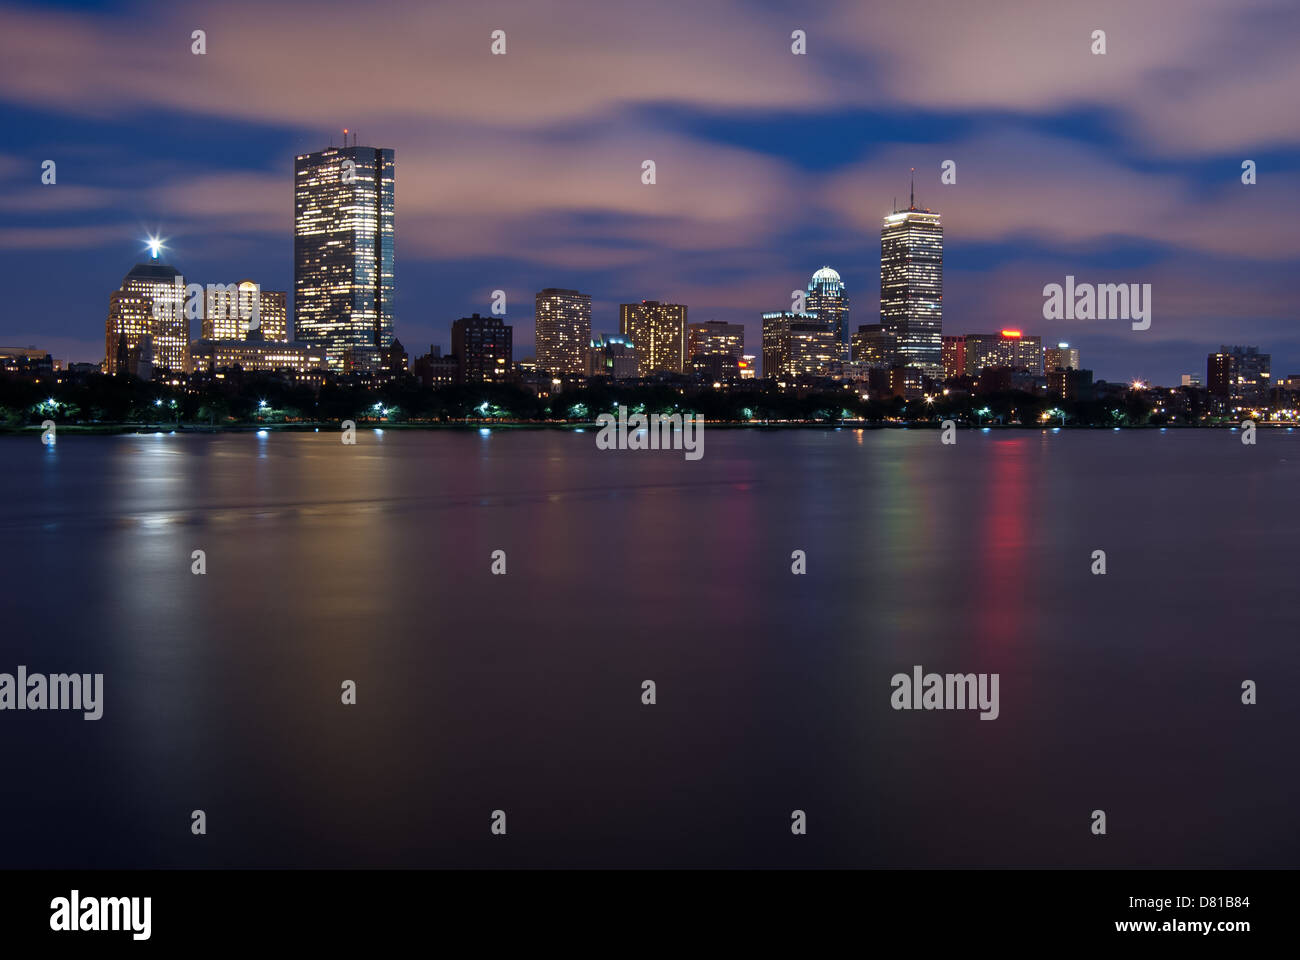 Night view of the Boston Skyline with brightly illuminated buildings Stock Photo